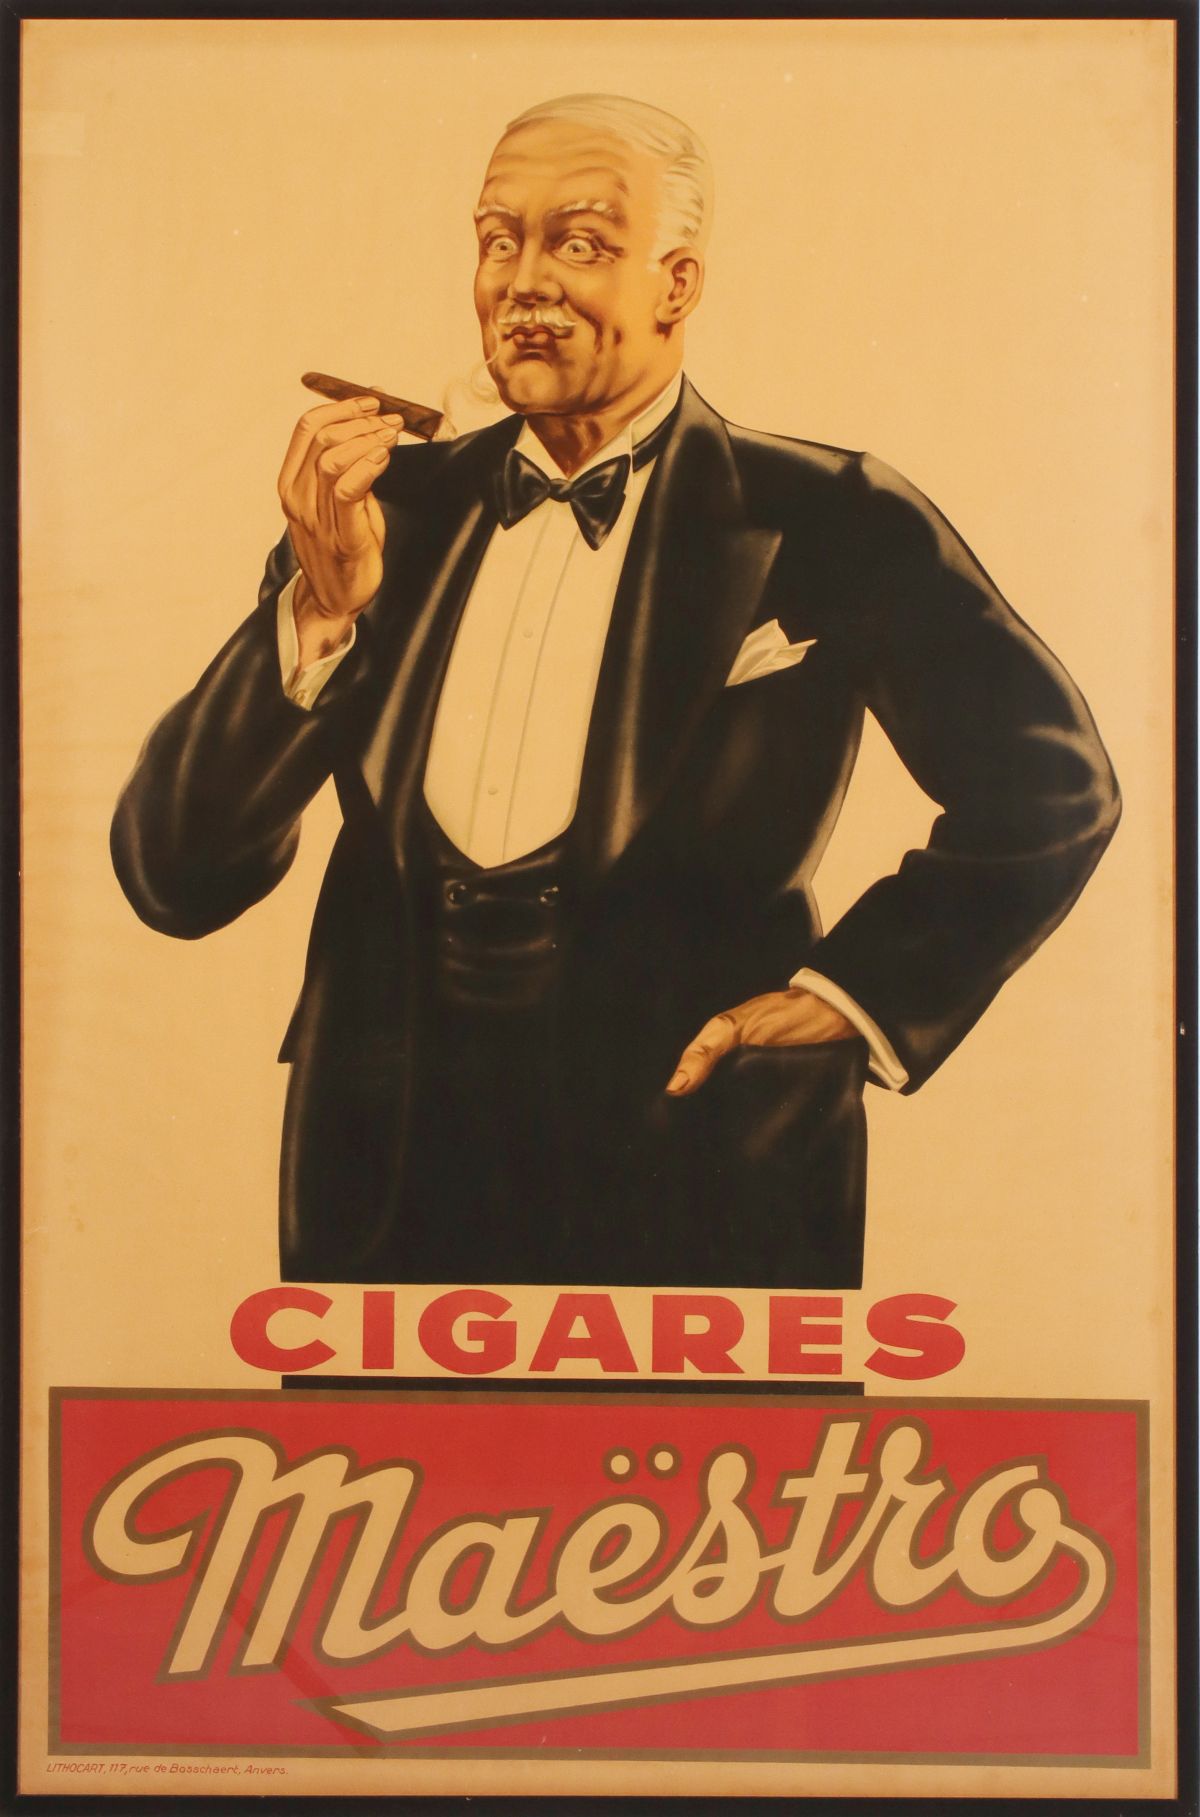 A 1930s ADVERTISING POSTER FOR MAESTRO CIGARES